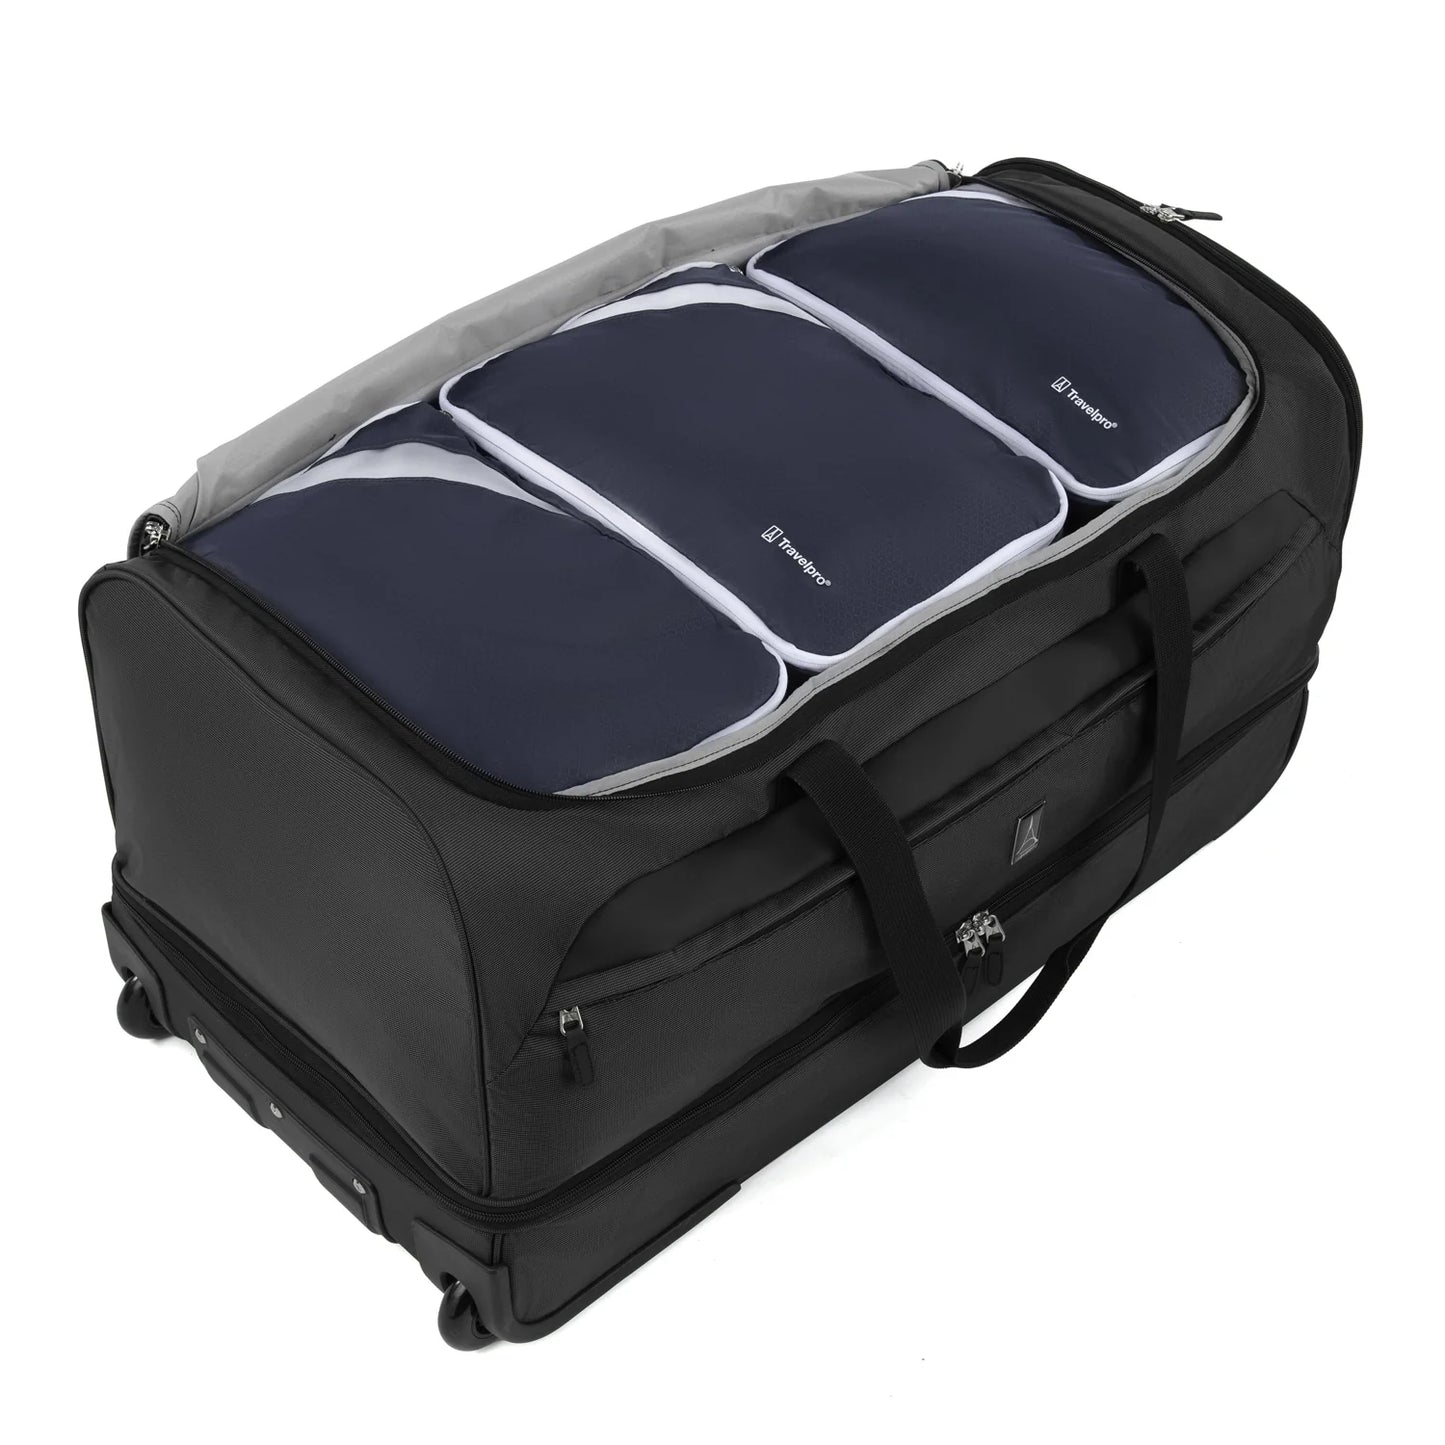 Final Sale- Travelpro Roadtrip 30" Drop-Bottom Rolling Duffel with Packing Cubes- 4152130